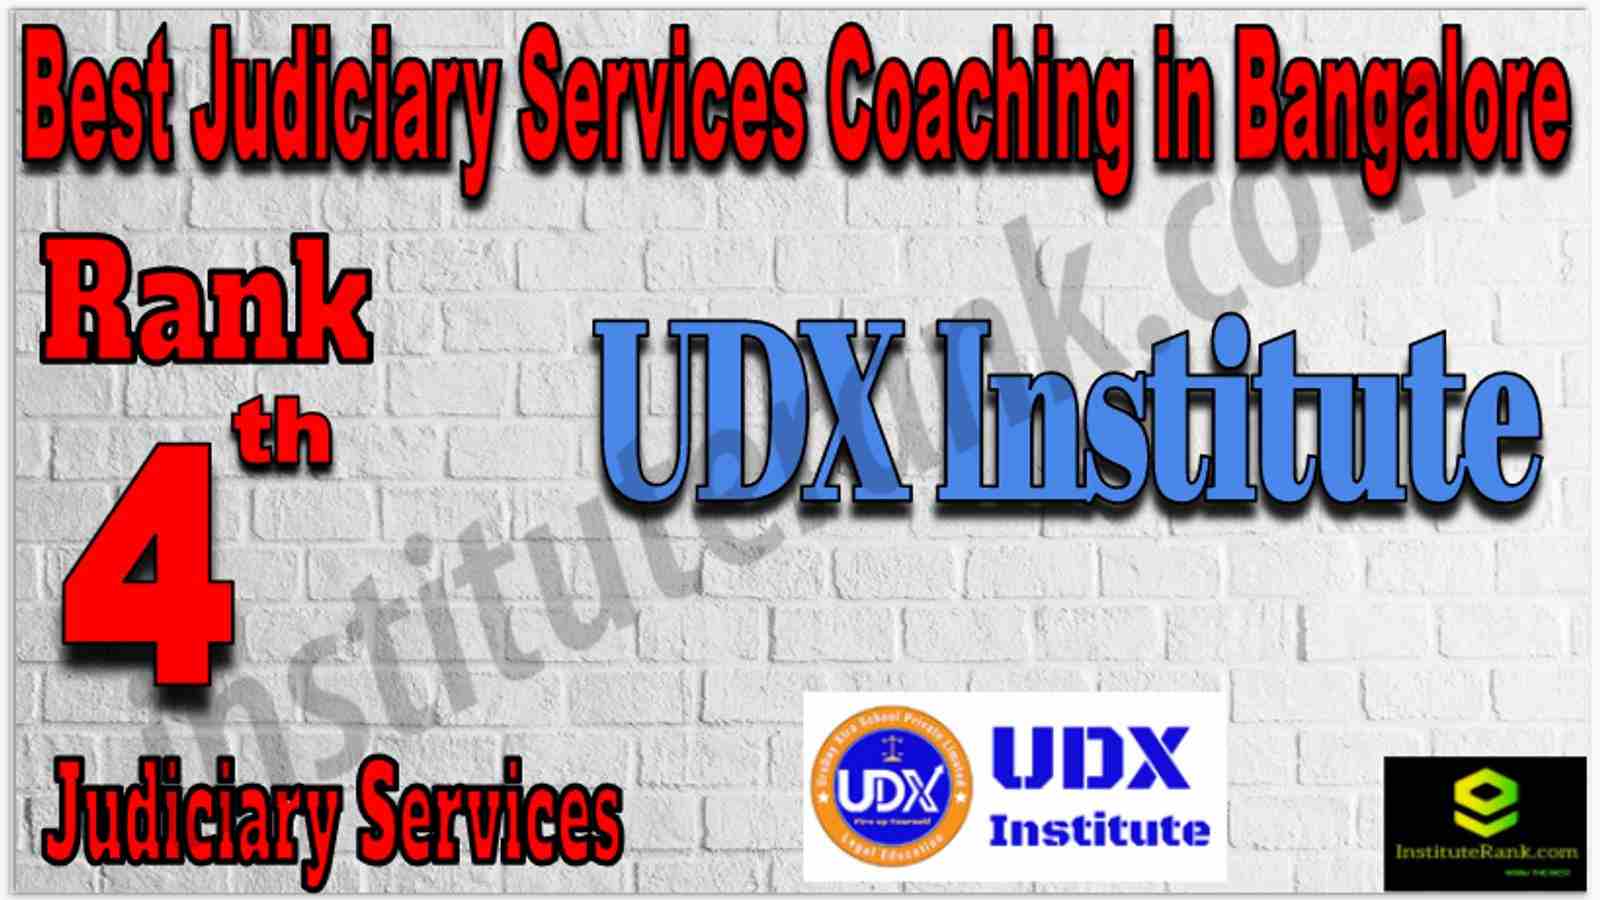 Rank 4 Best Judiciary Services Coaching in Bangalore